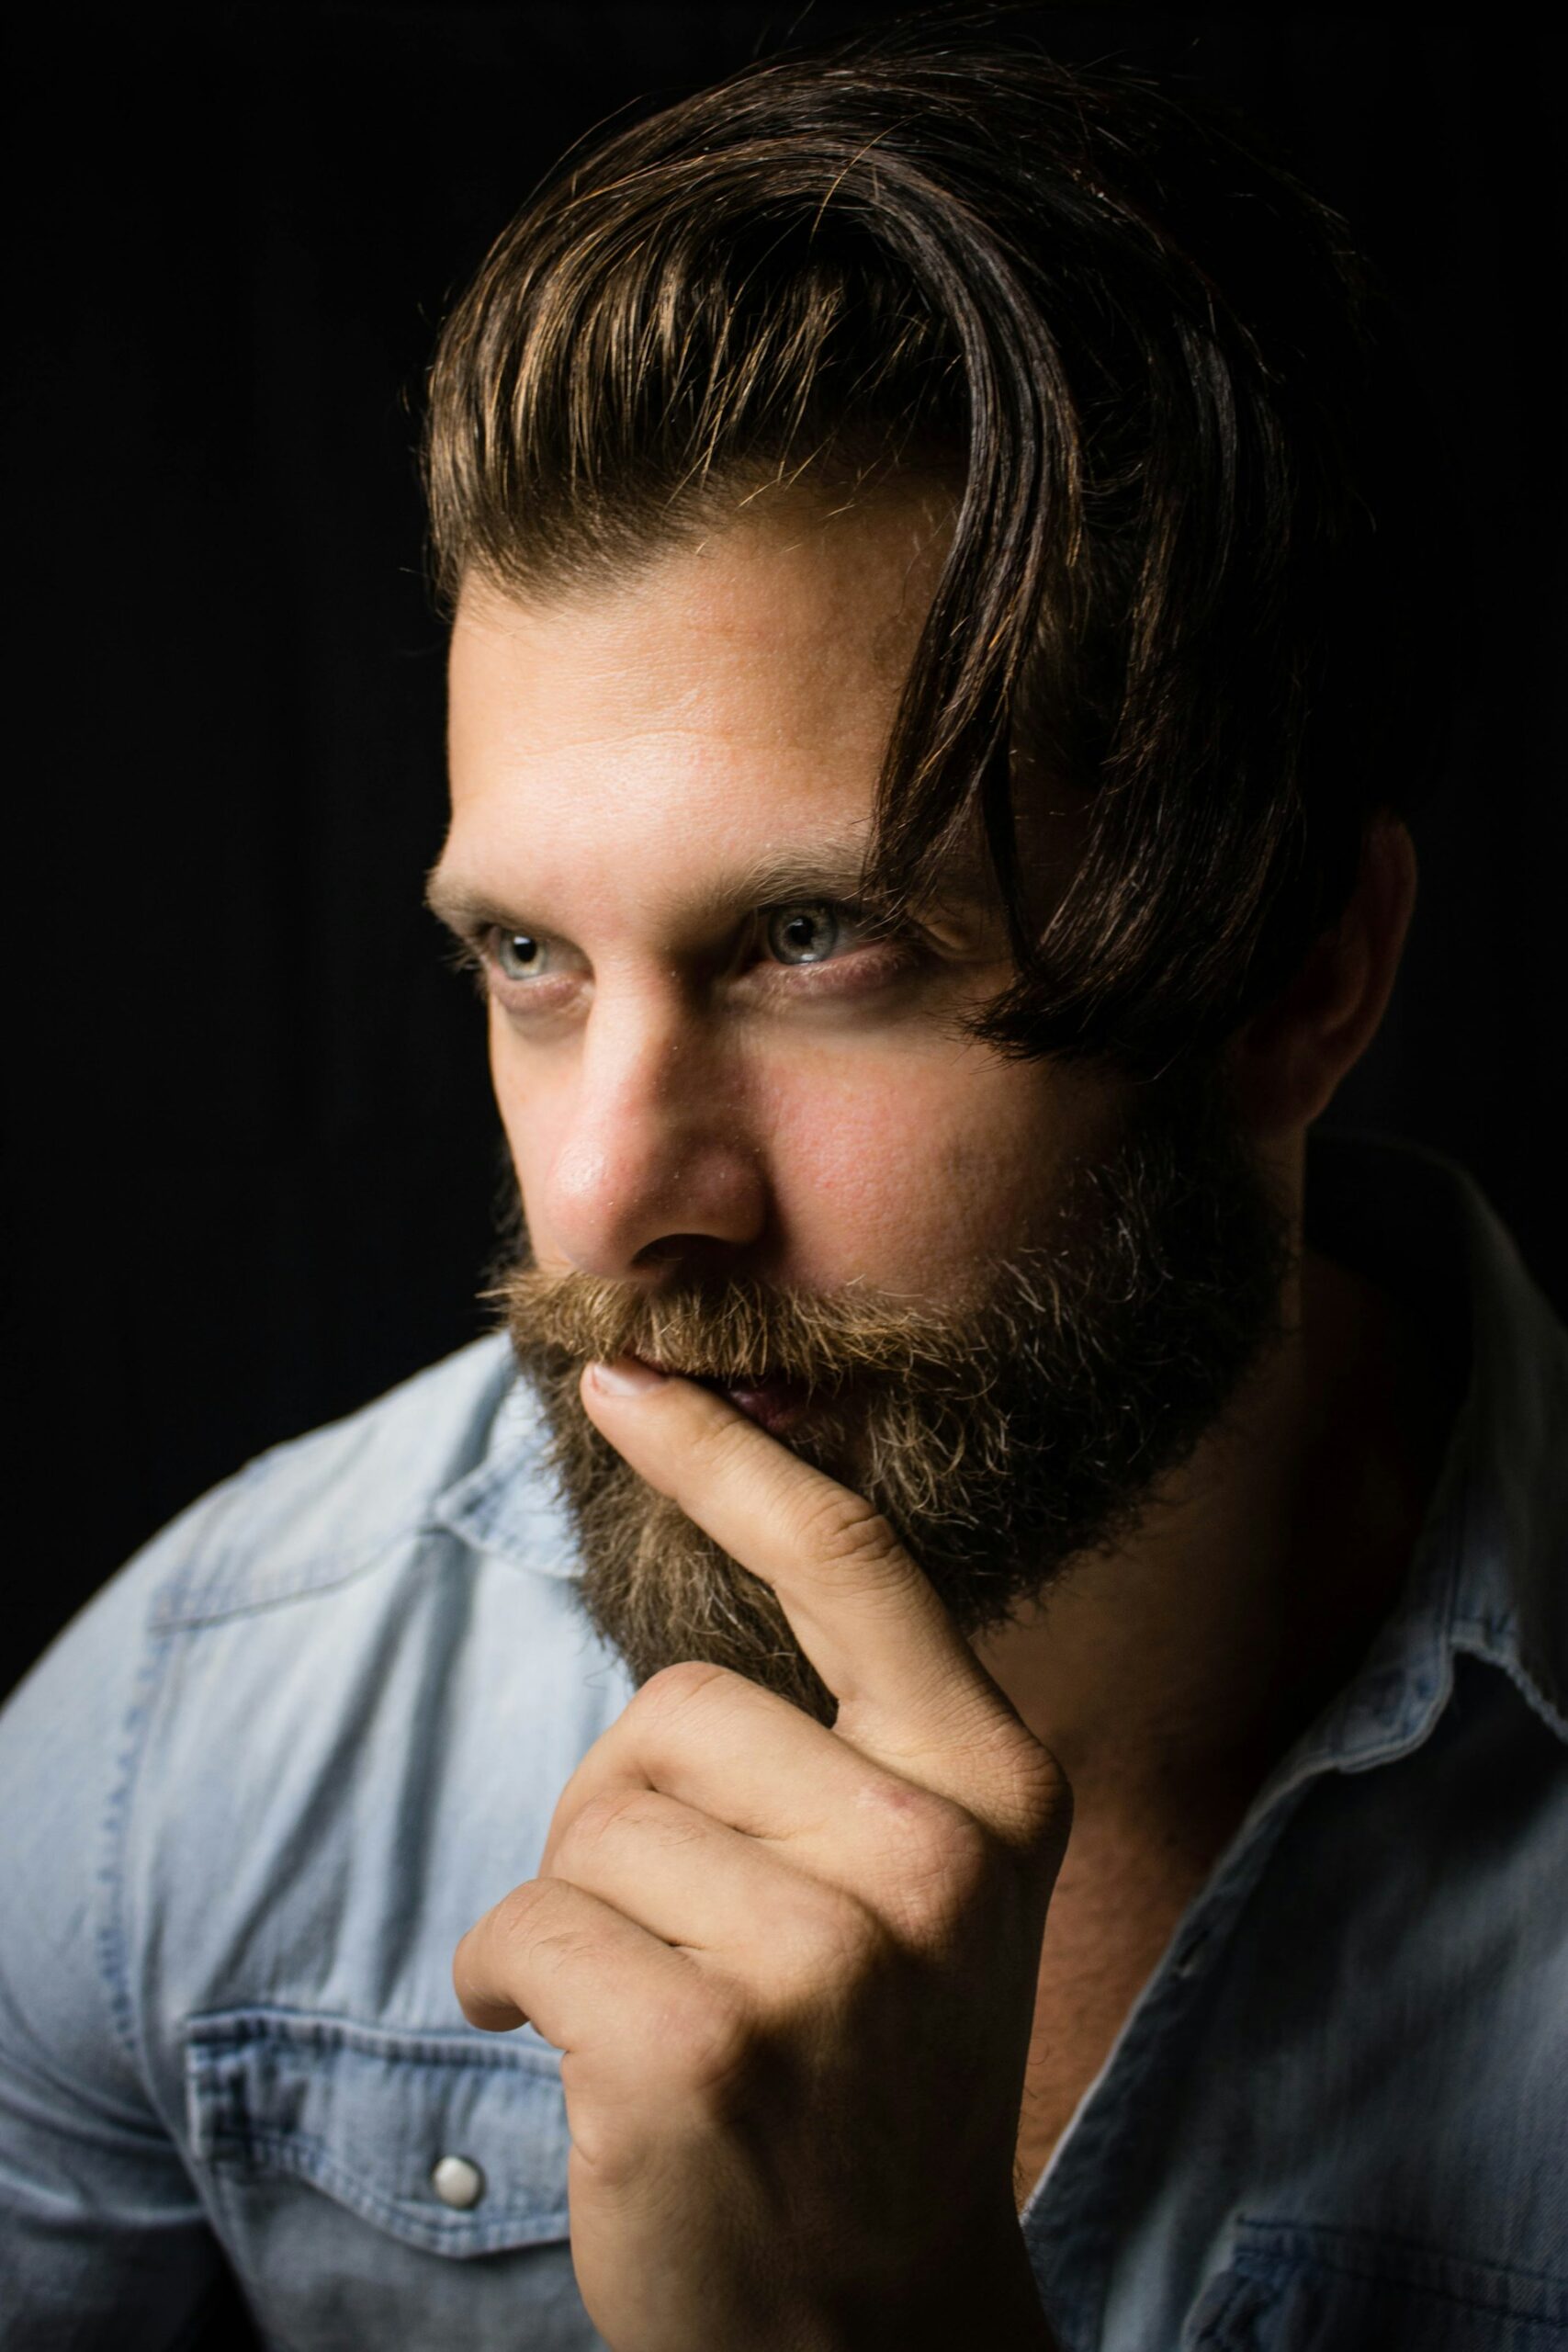 What are the Essential Tips for Growing a Beard?